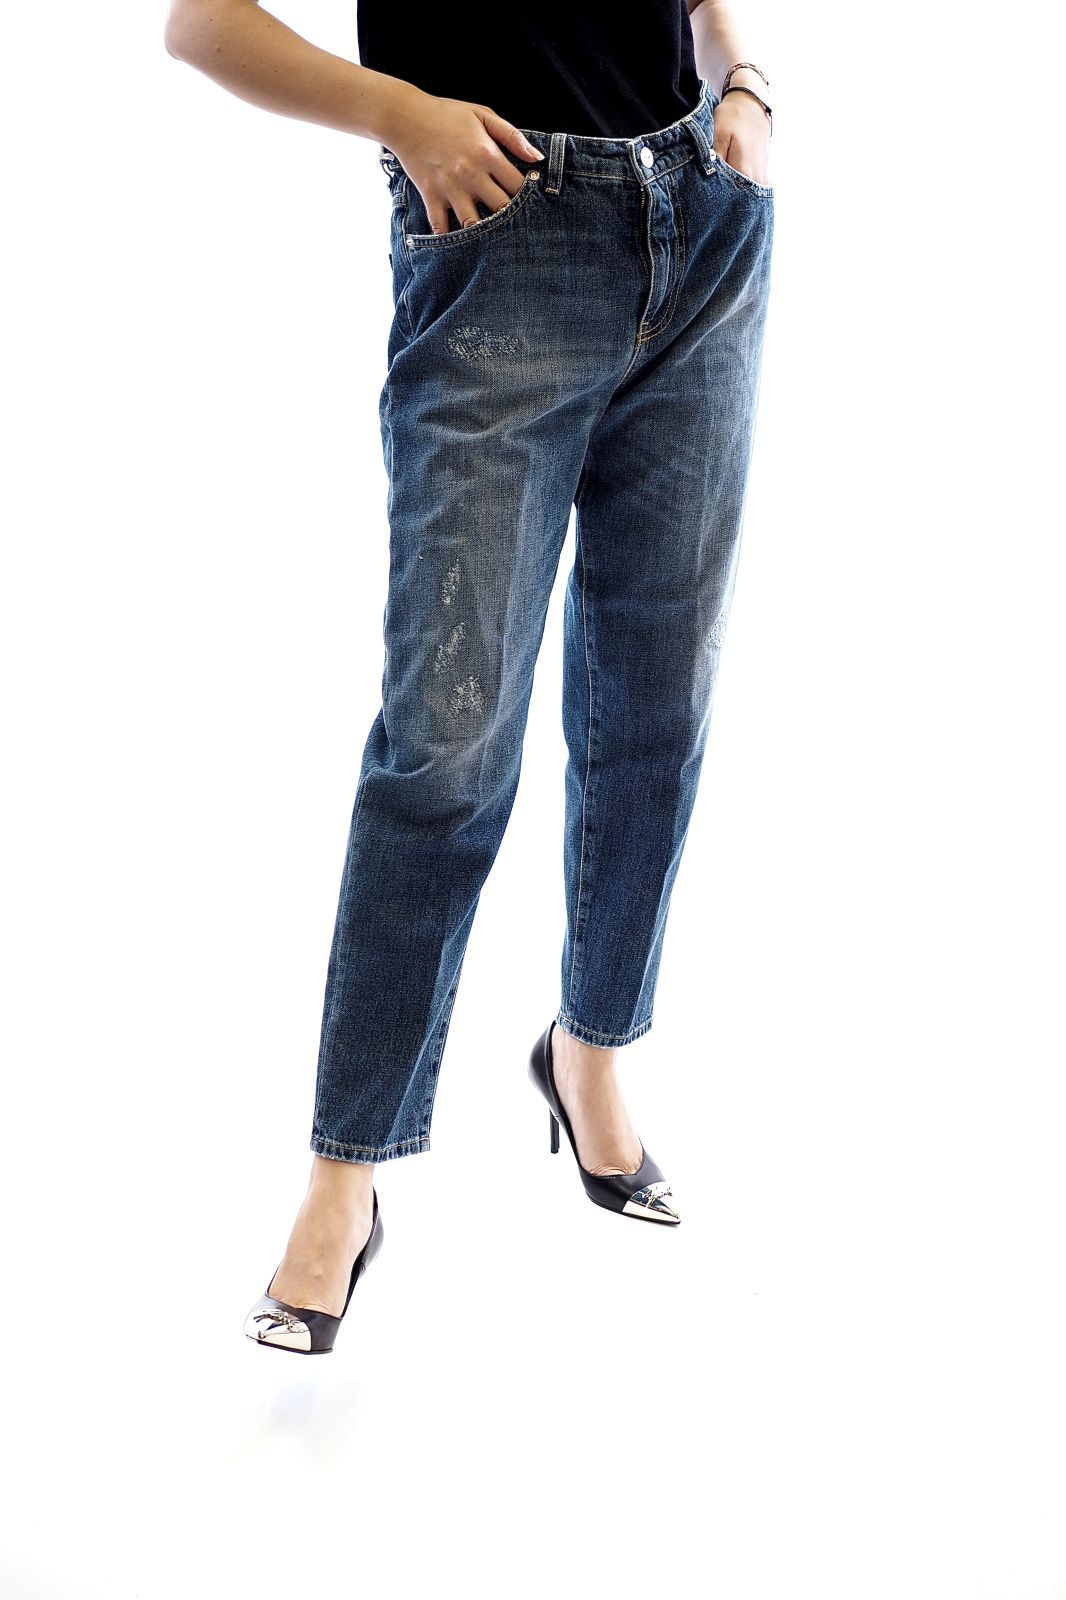 Nine In The Morning pantalon Jeans femmes (NINE-Jeans chino large - LIVING Jeans chino déchiré leg) - Marine | Much more than shoes